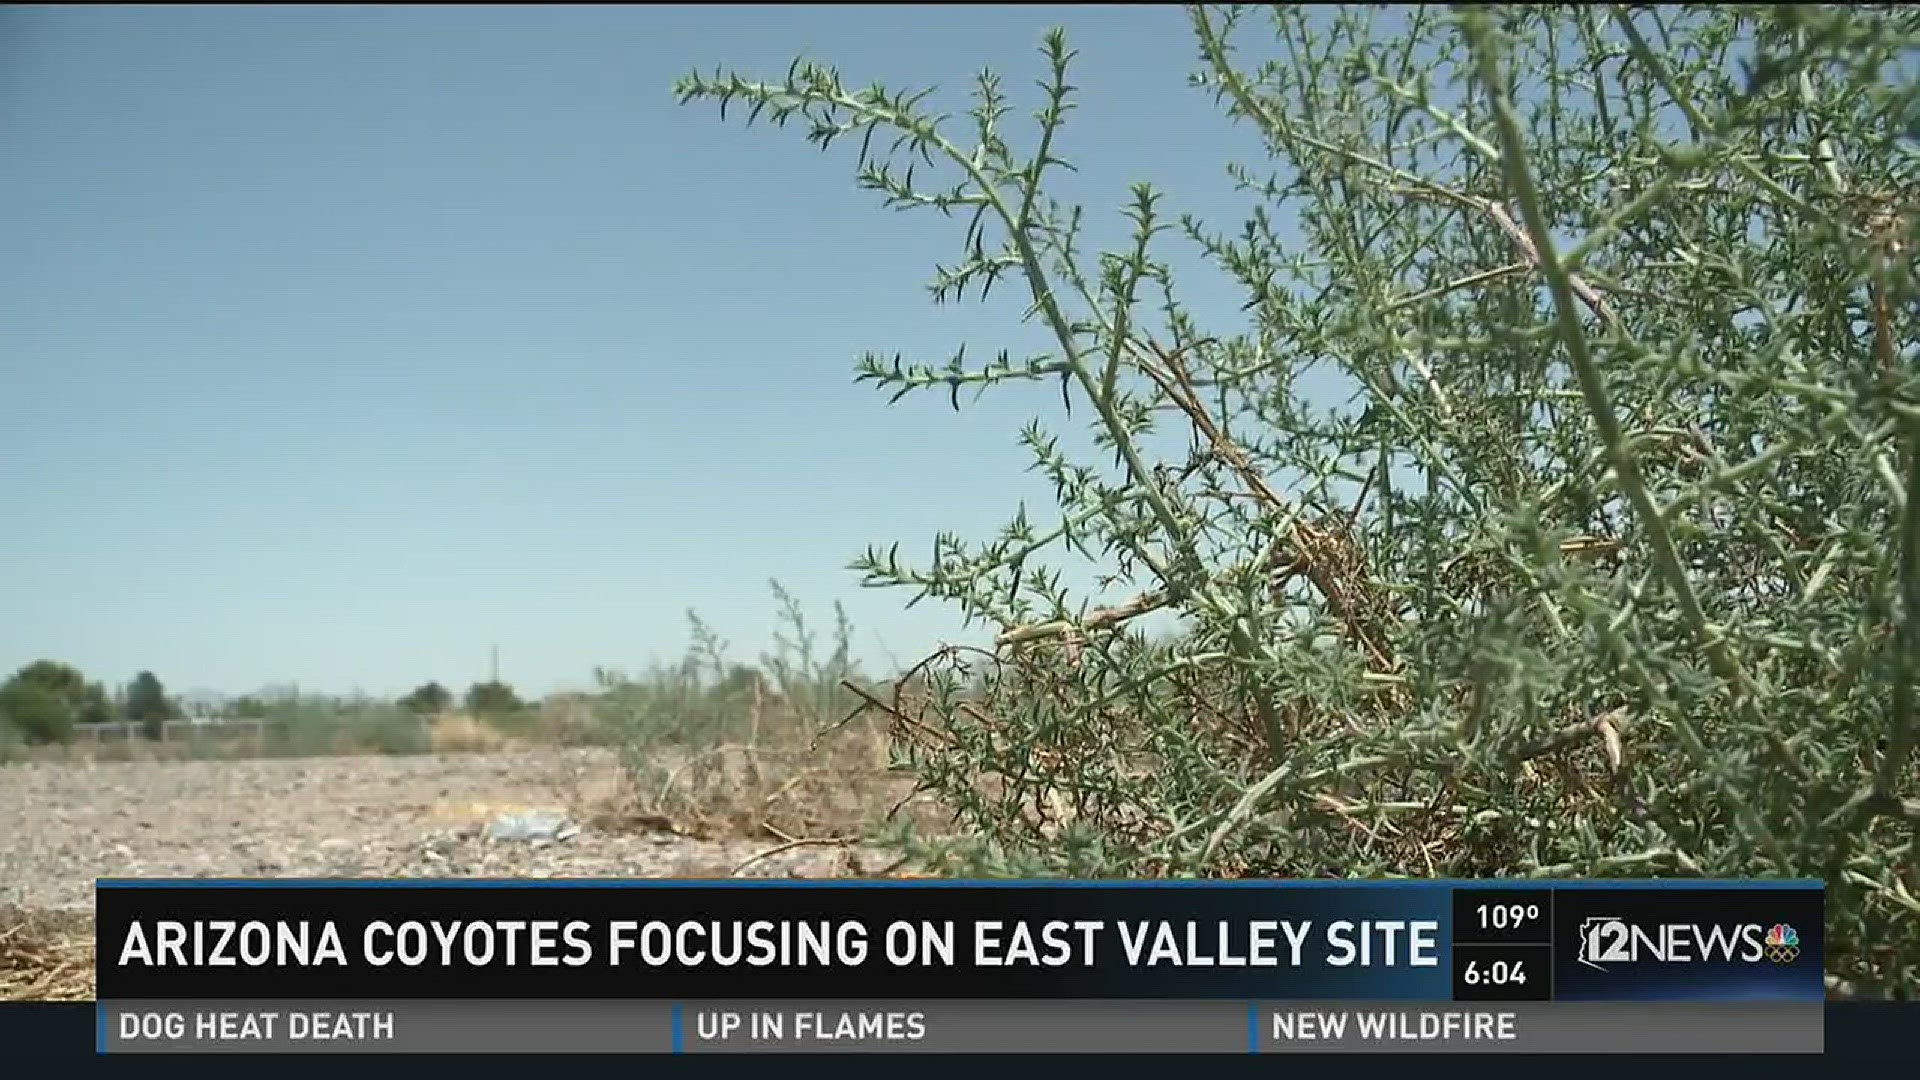 The Arizona Coyotes are focused on an East Valley location for a new arena